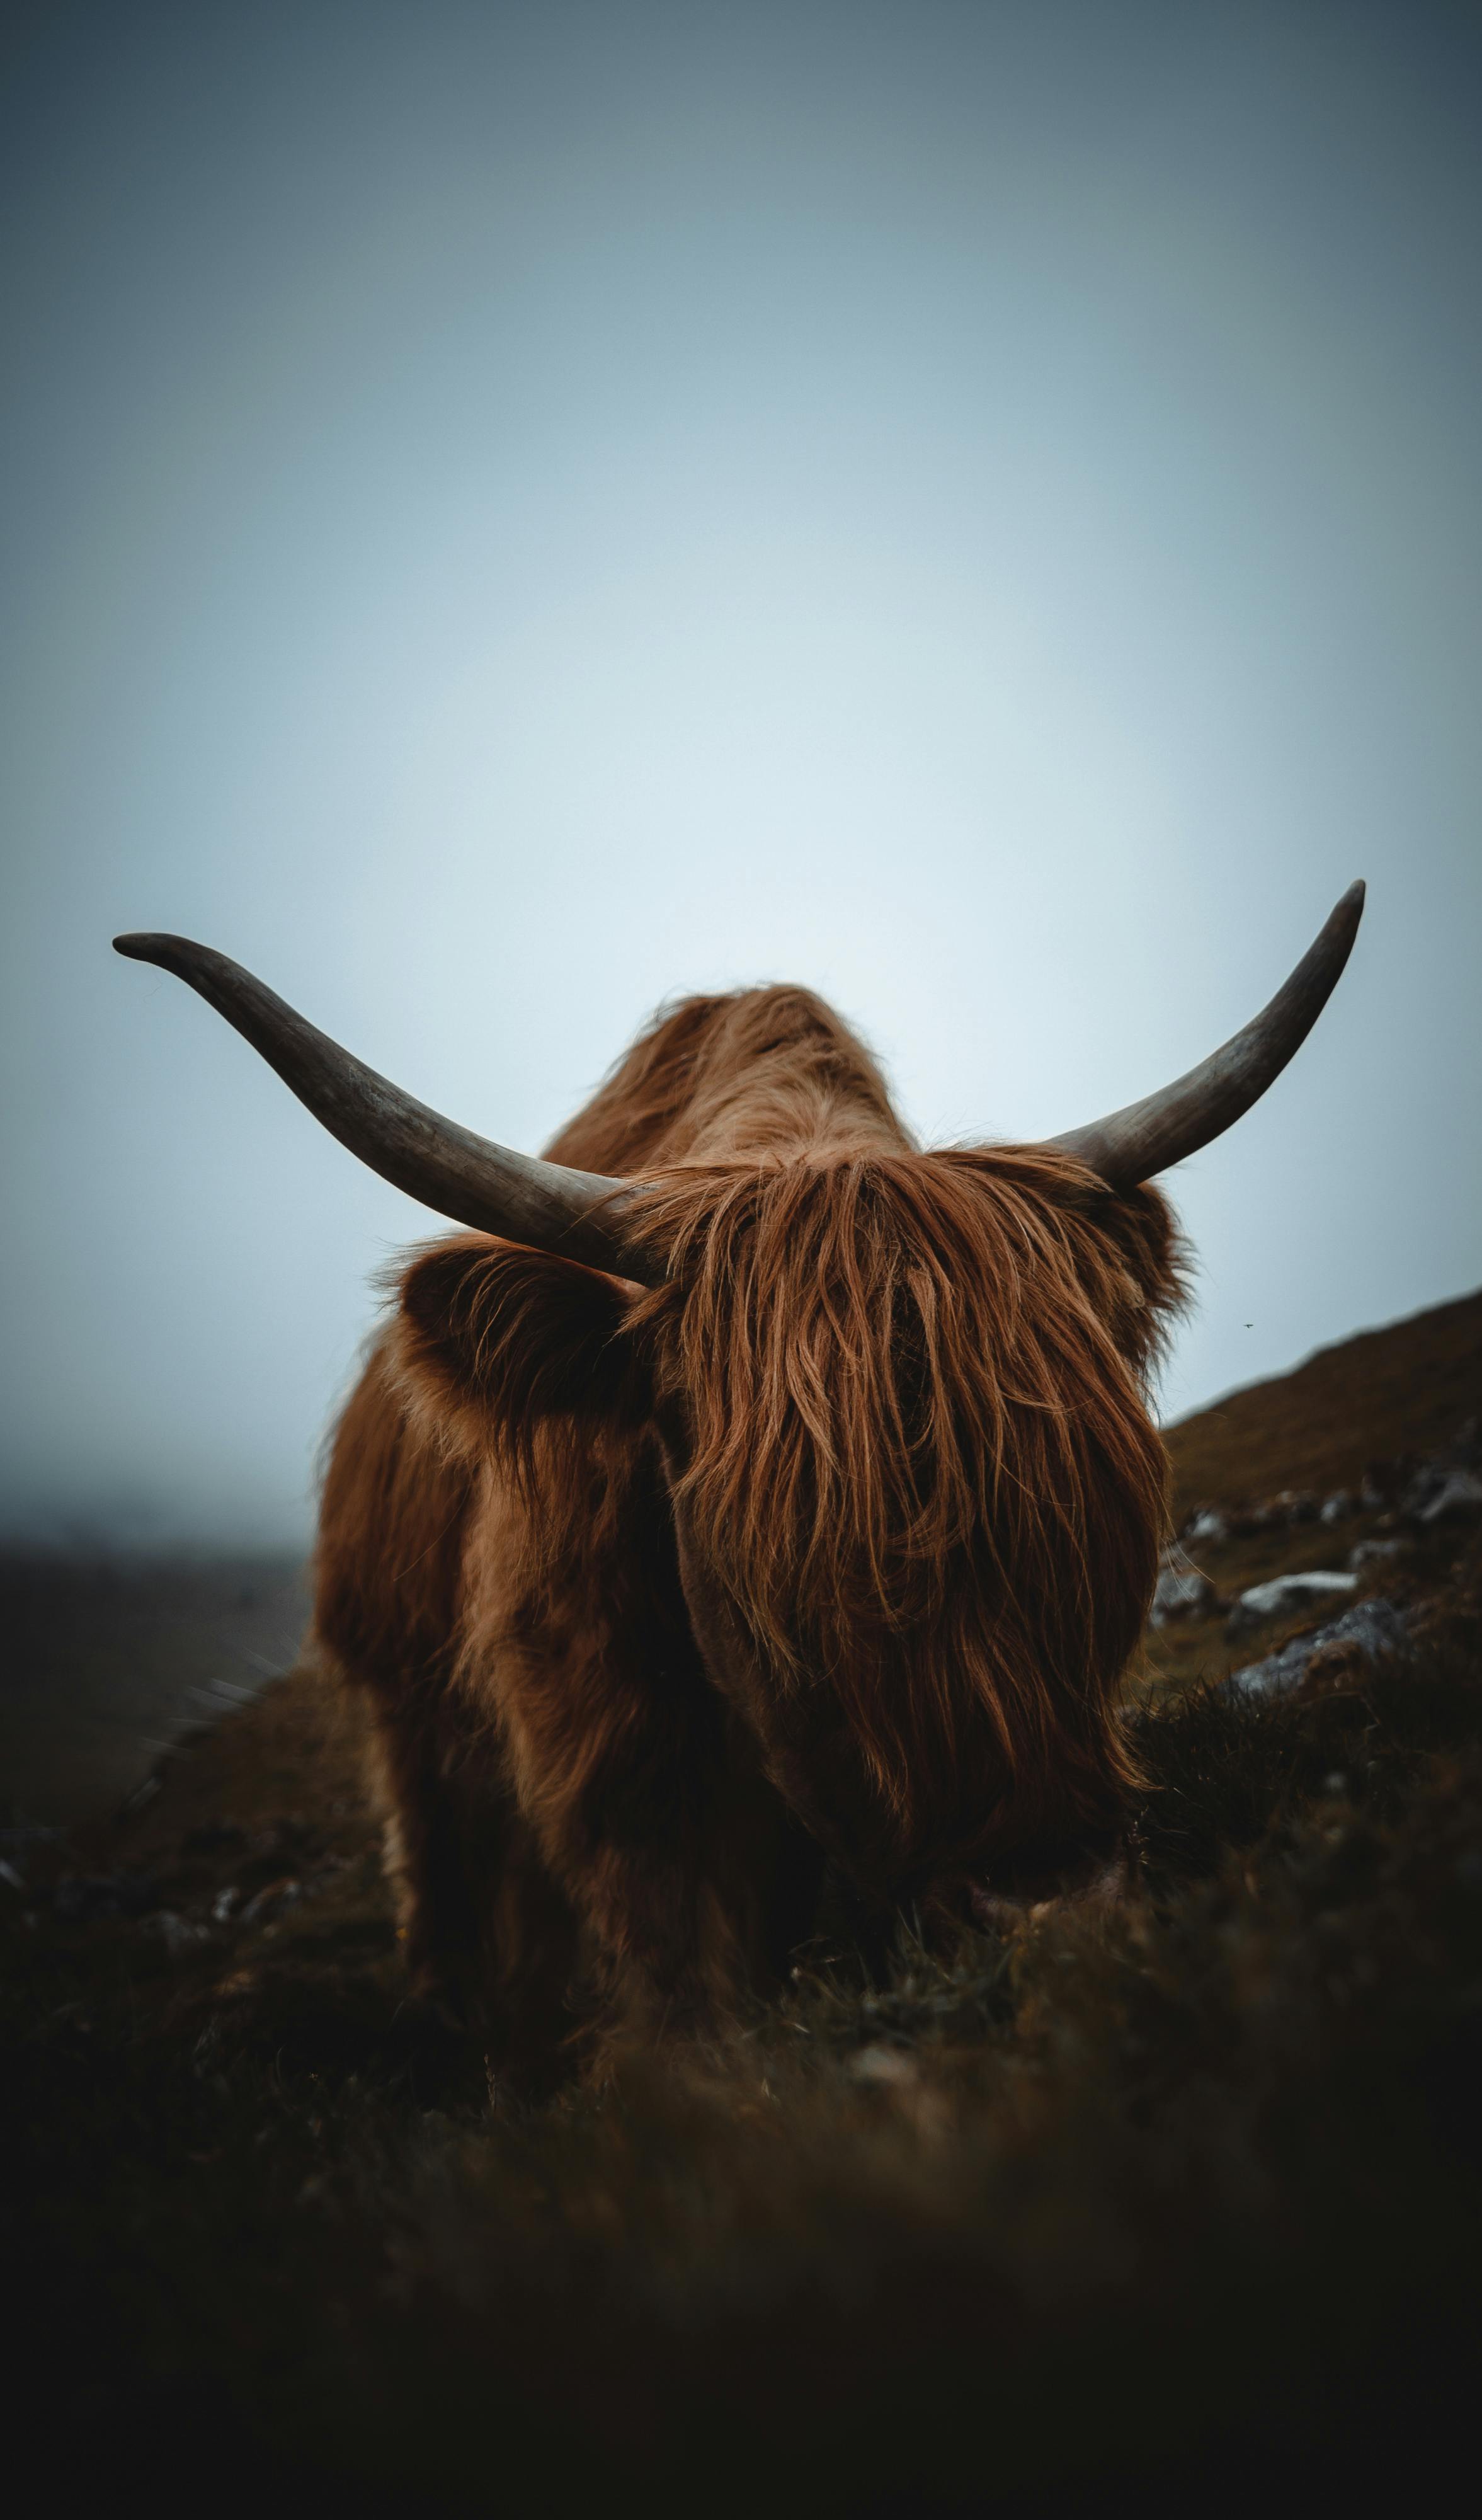 8,484+ Best Free Highland cattle Stock Photos & Images · 100% Royalty ...